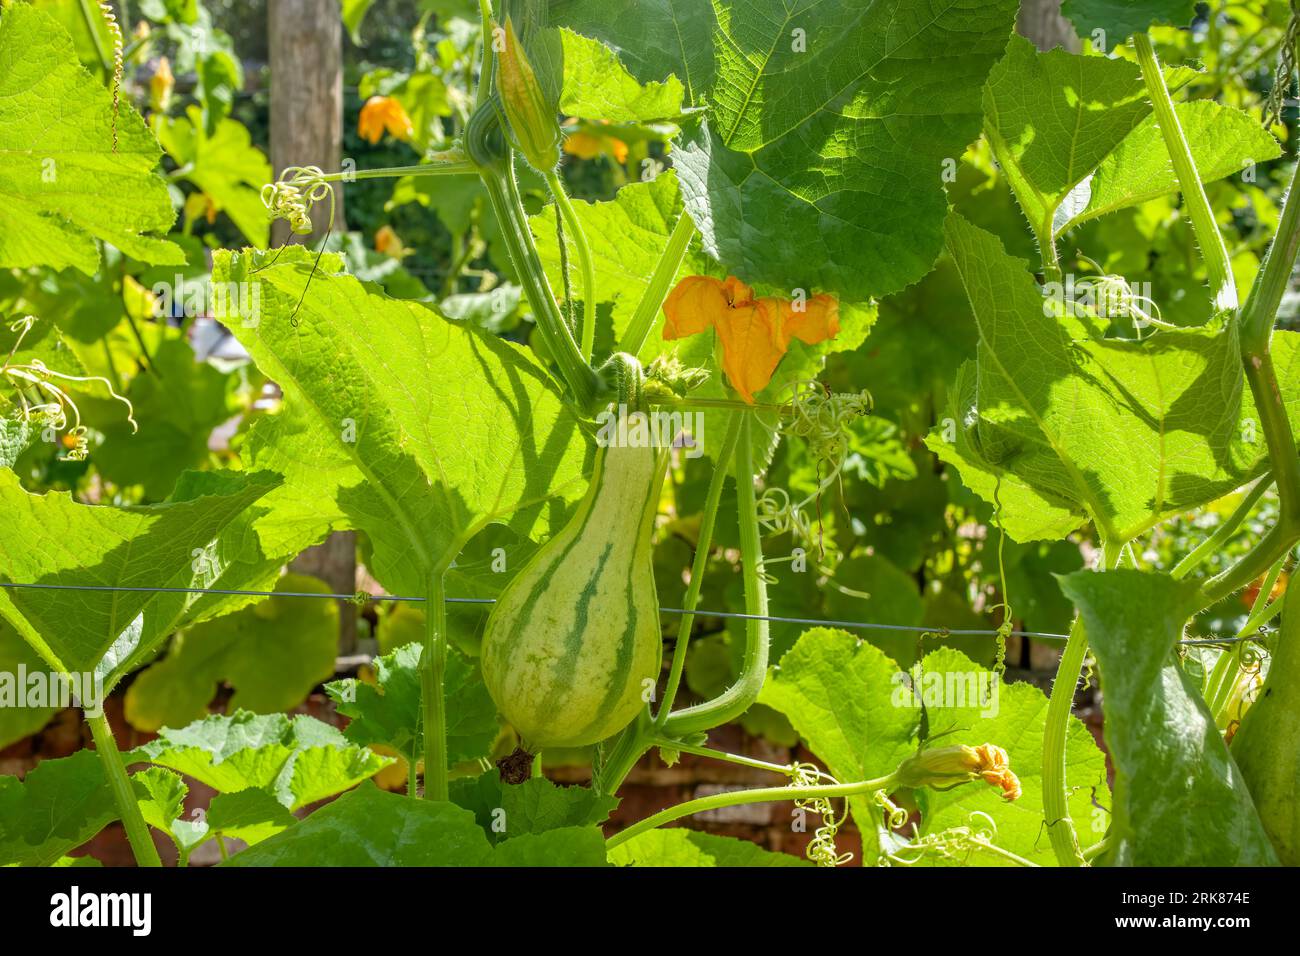 close up of bottle gourd growing on the vine Stock Photo